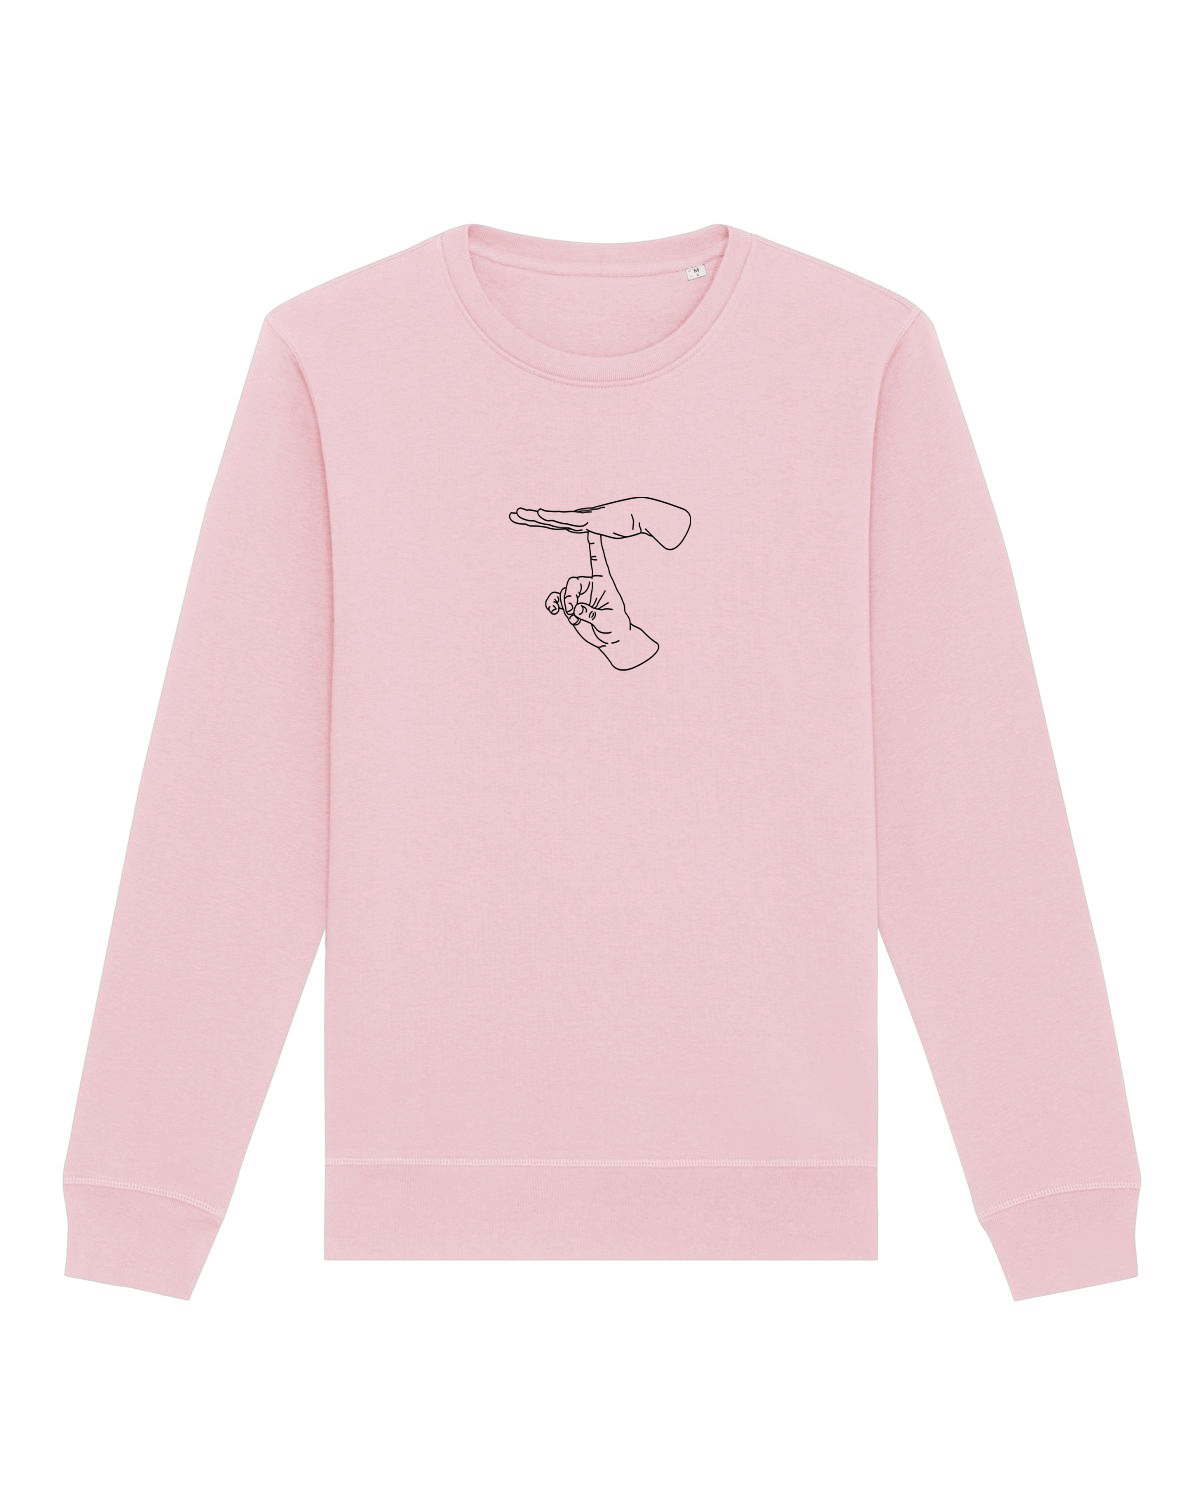 TIME OUT | SWEATSHIRT